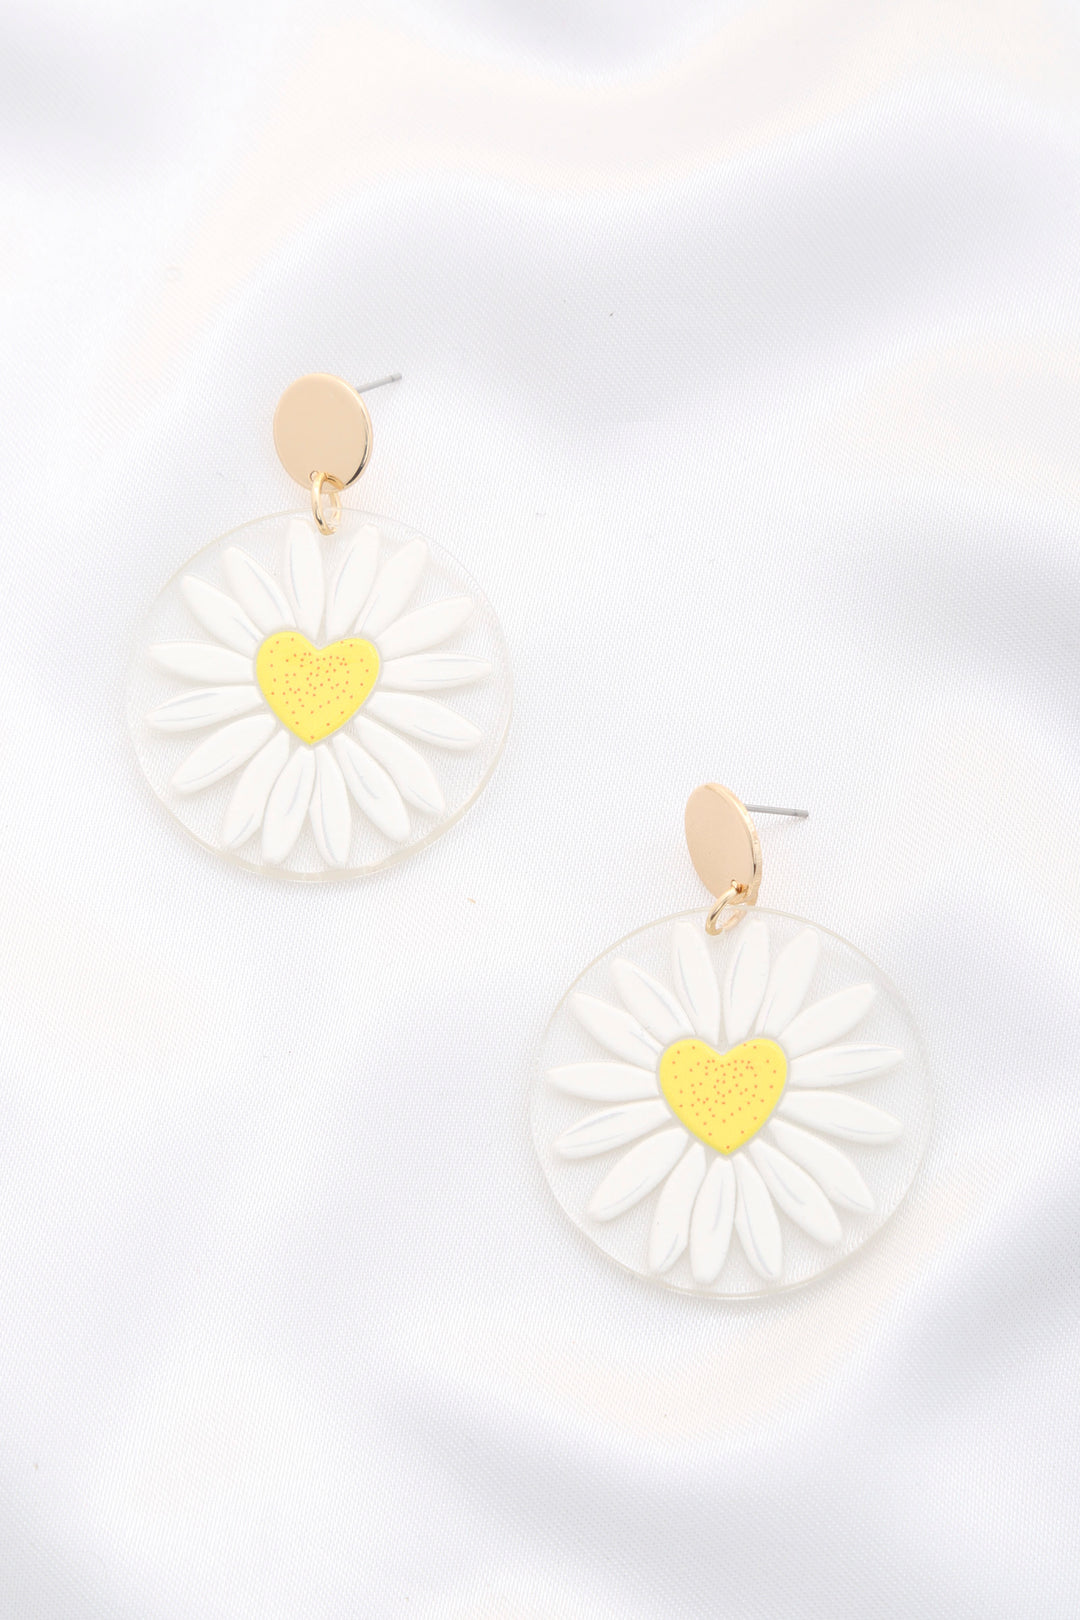 Daisy Printed Round Ac Drop Earrings